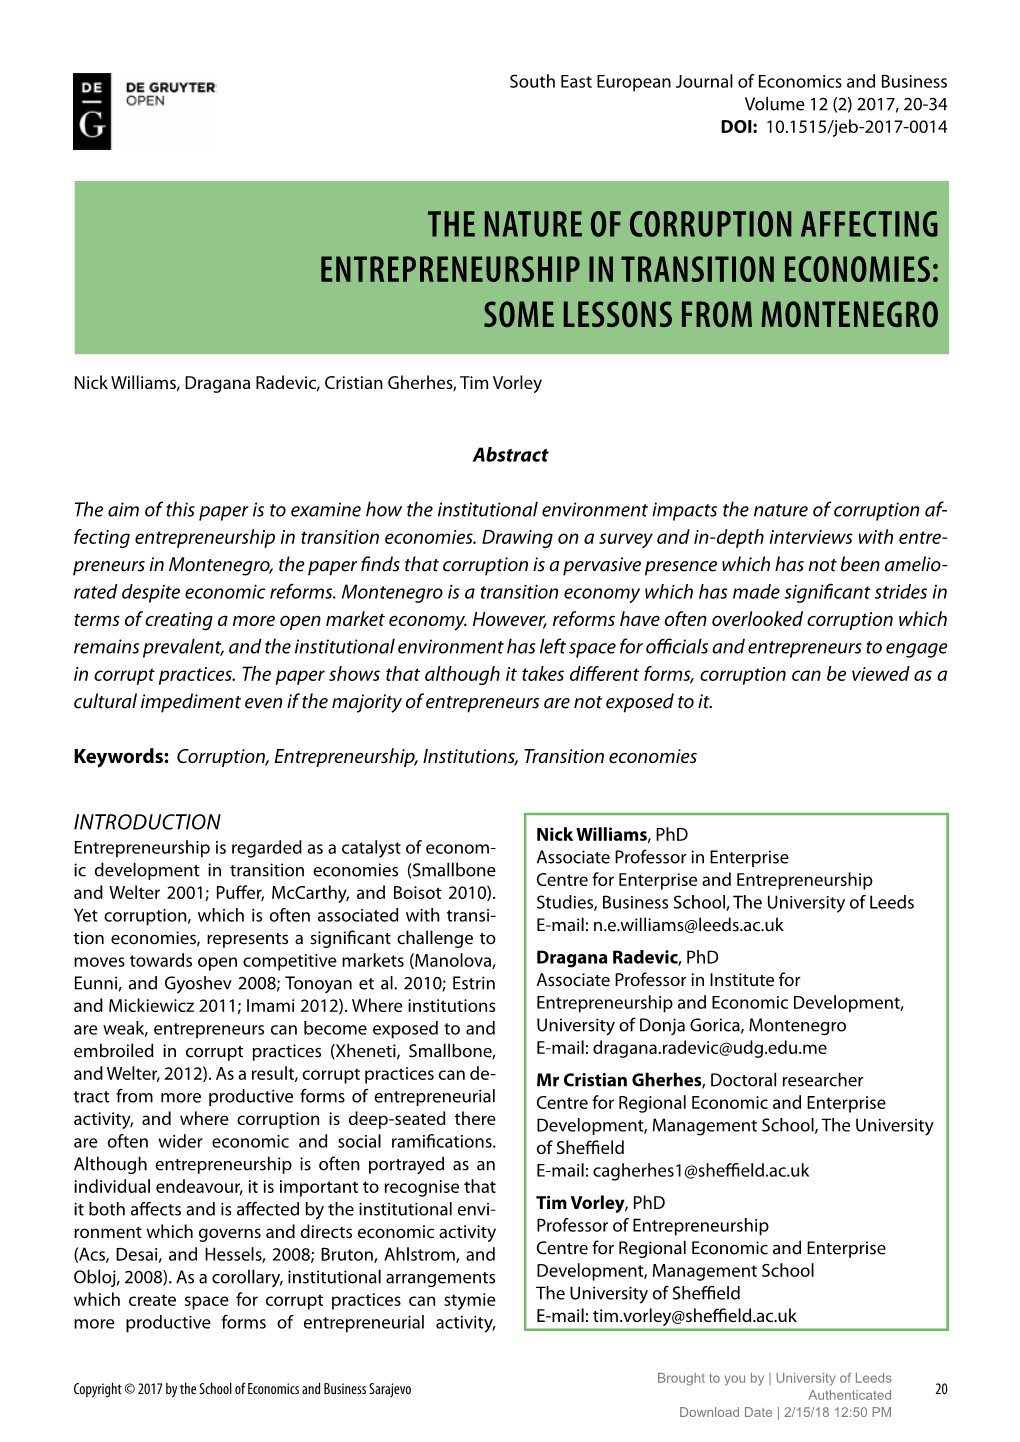 The Nature of Corruption Affecting Entrepreneurship in Transition Economies: Some Lessons from Montenegro